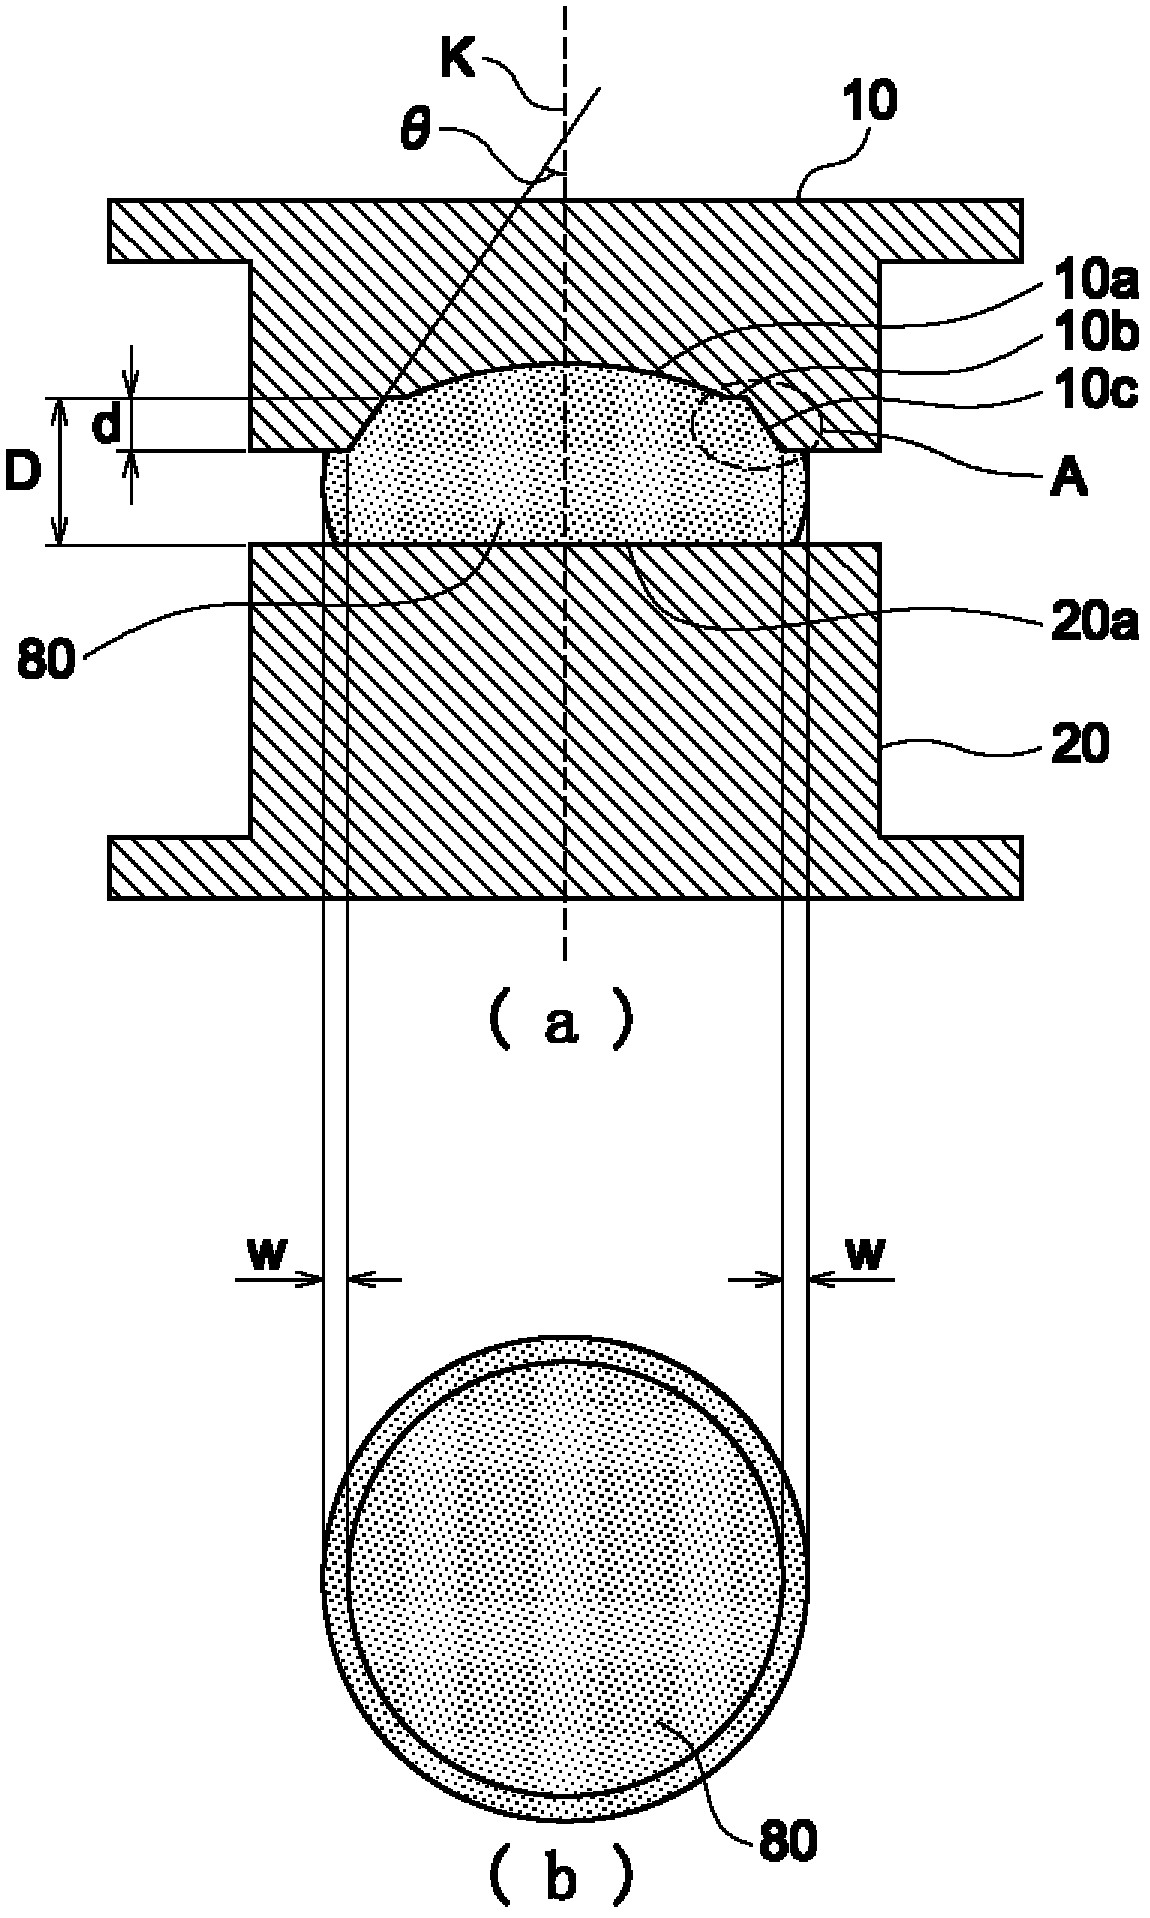 Apparatus for manufacturing glass molding